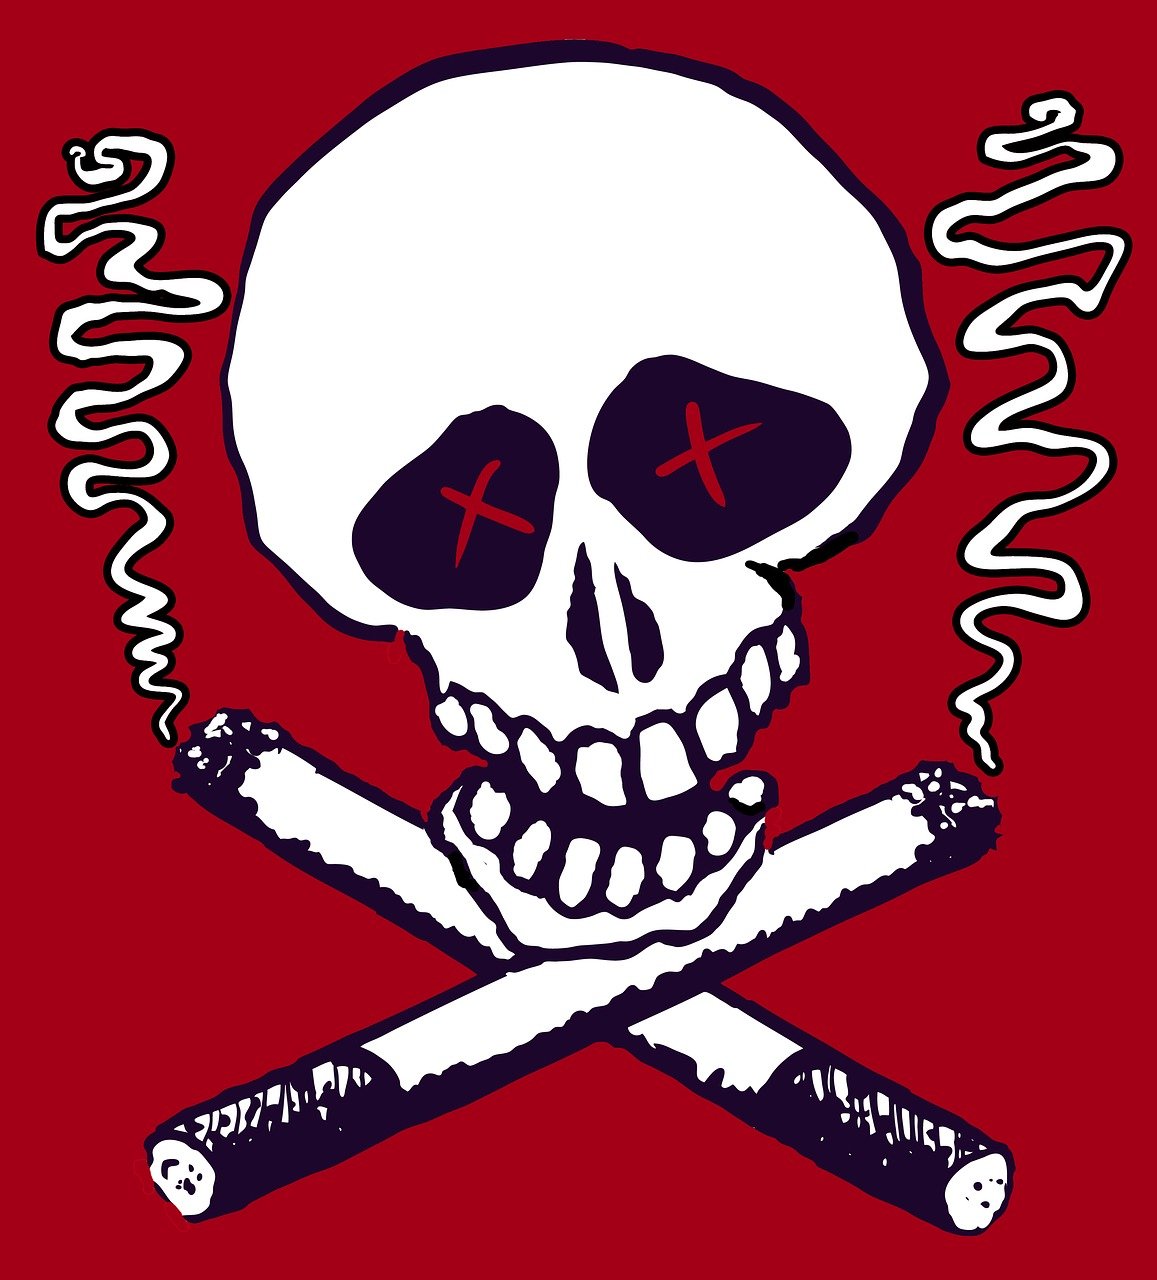 a skull and two crossed baseball bats on a red background, sots art, smoking and bickering, ¯_(ツ)_/¯, smokey cannons, clubs